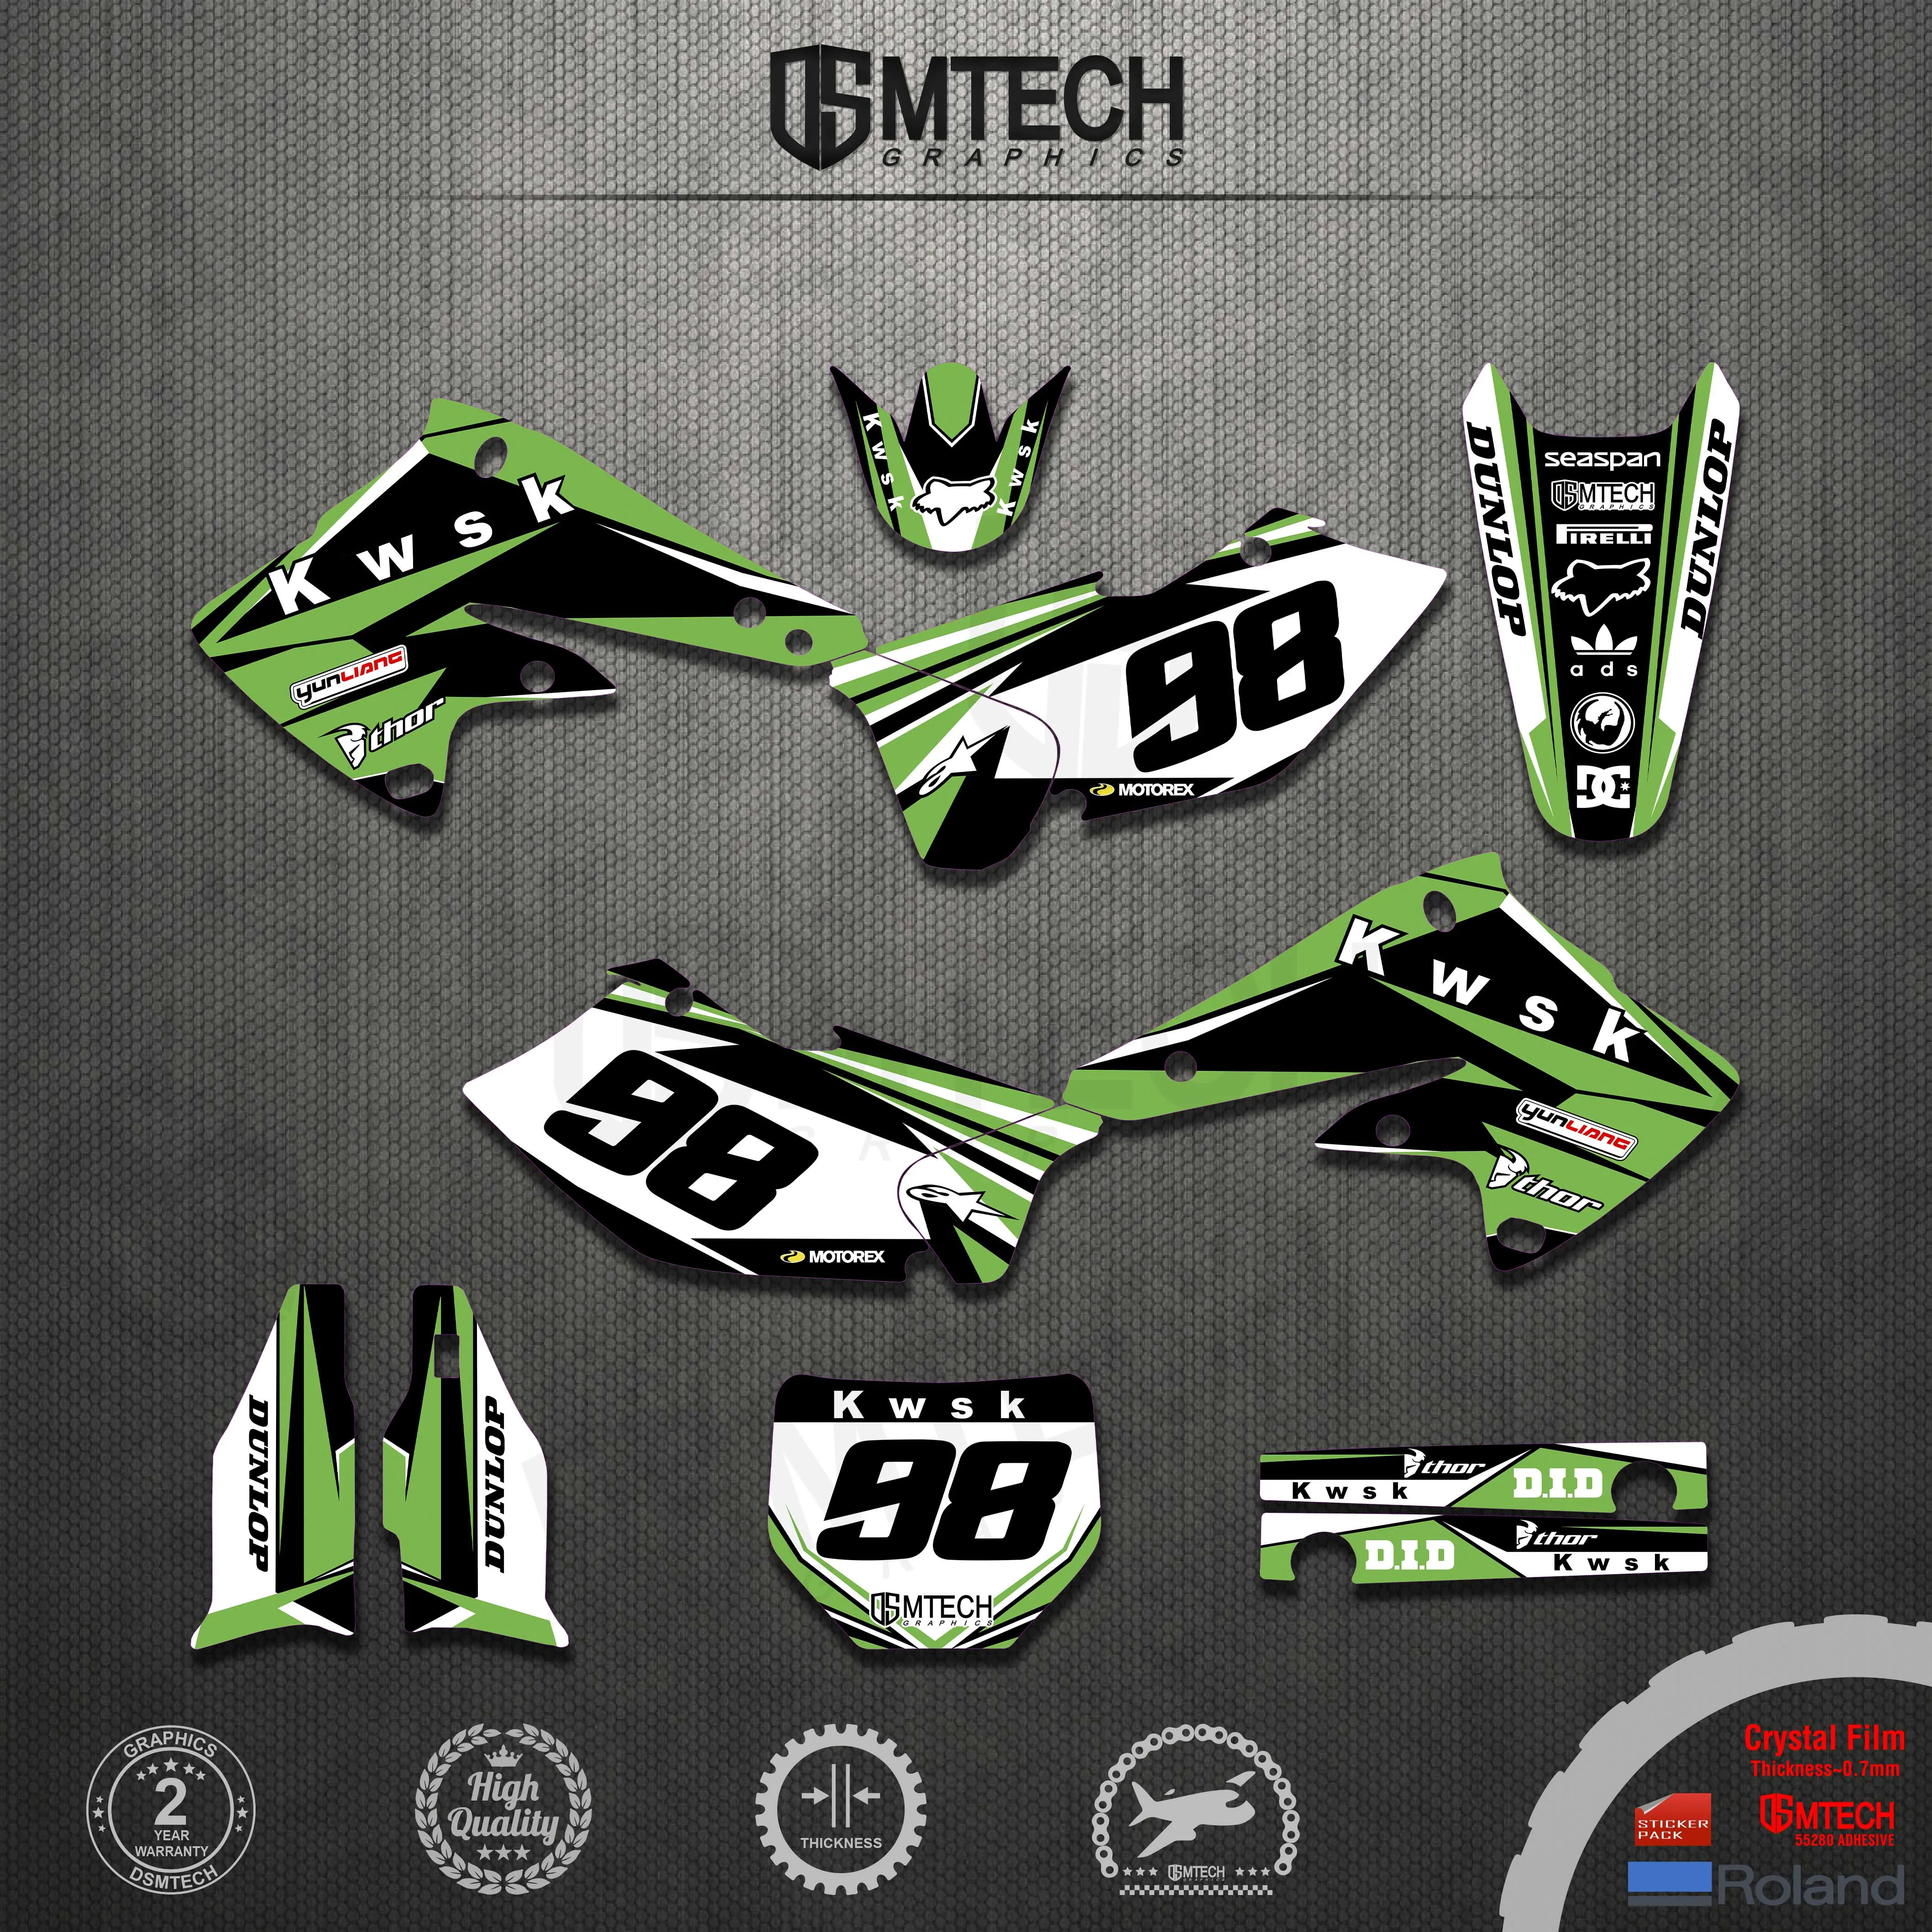 DSMTECH Motorcycle Graphics DECALS backgrounds STICKERS Kits For Kawasaki KXF250 KX250F 2004 2005 KXF 250 KX 250F